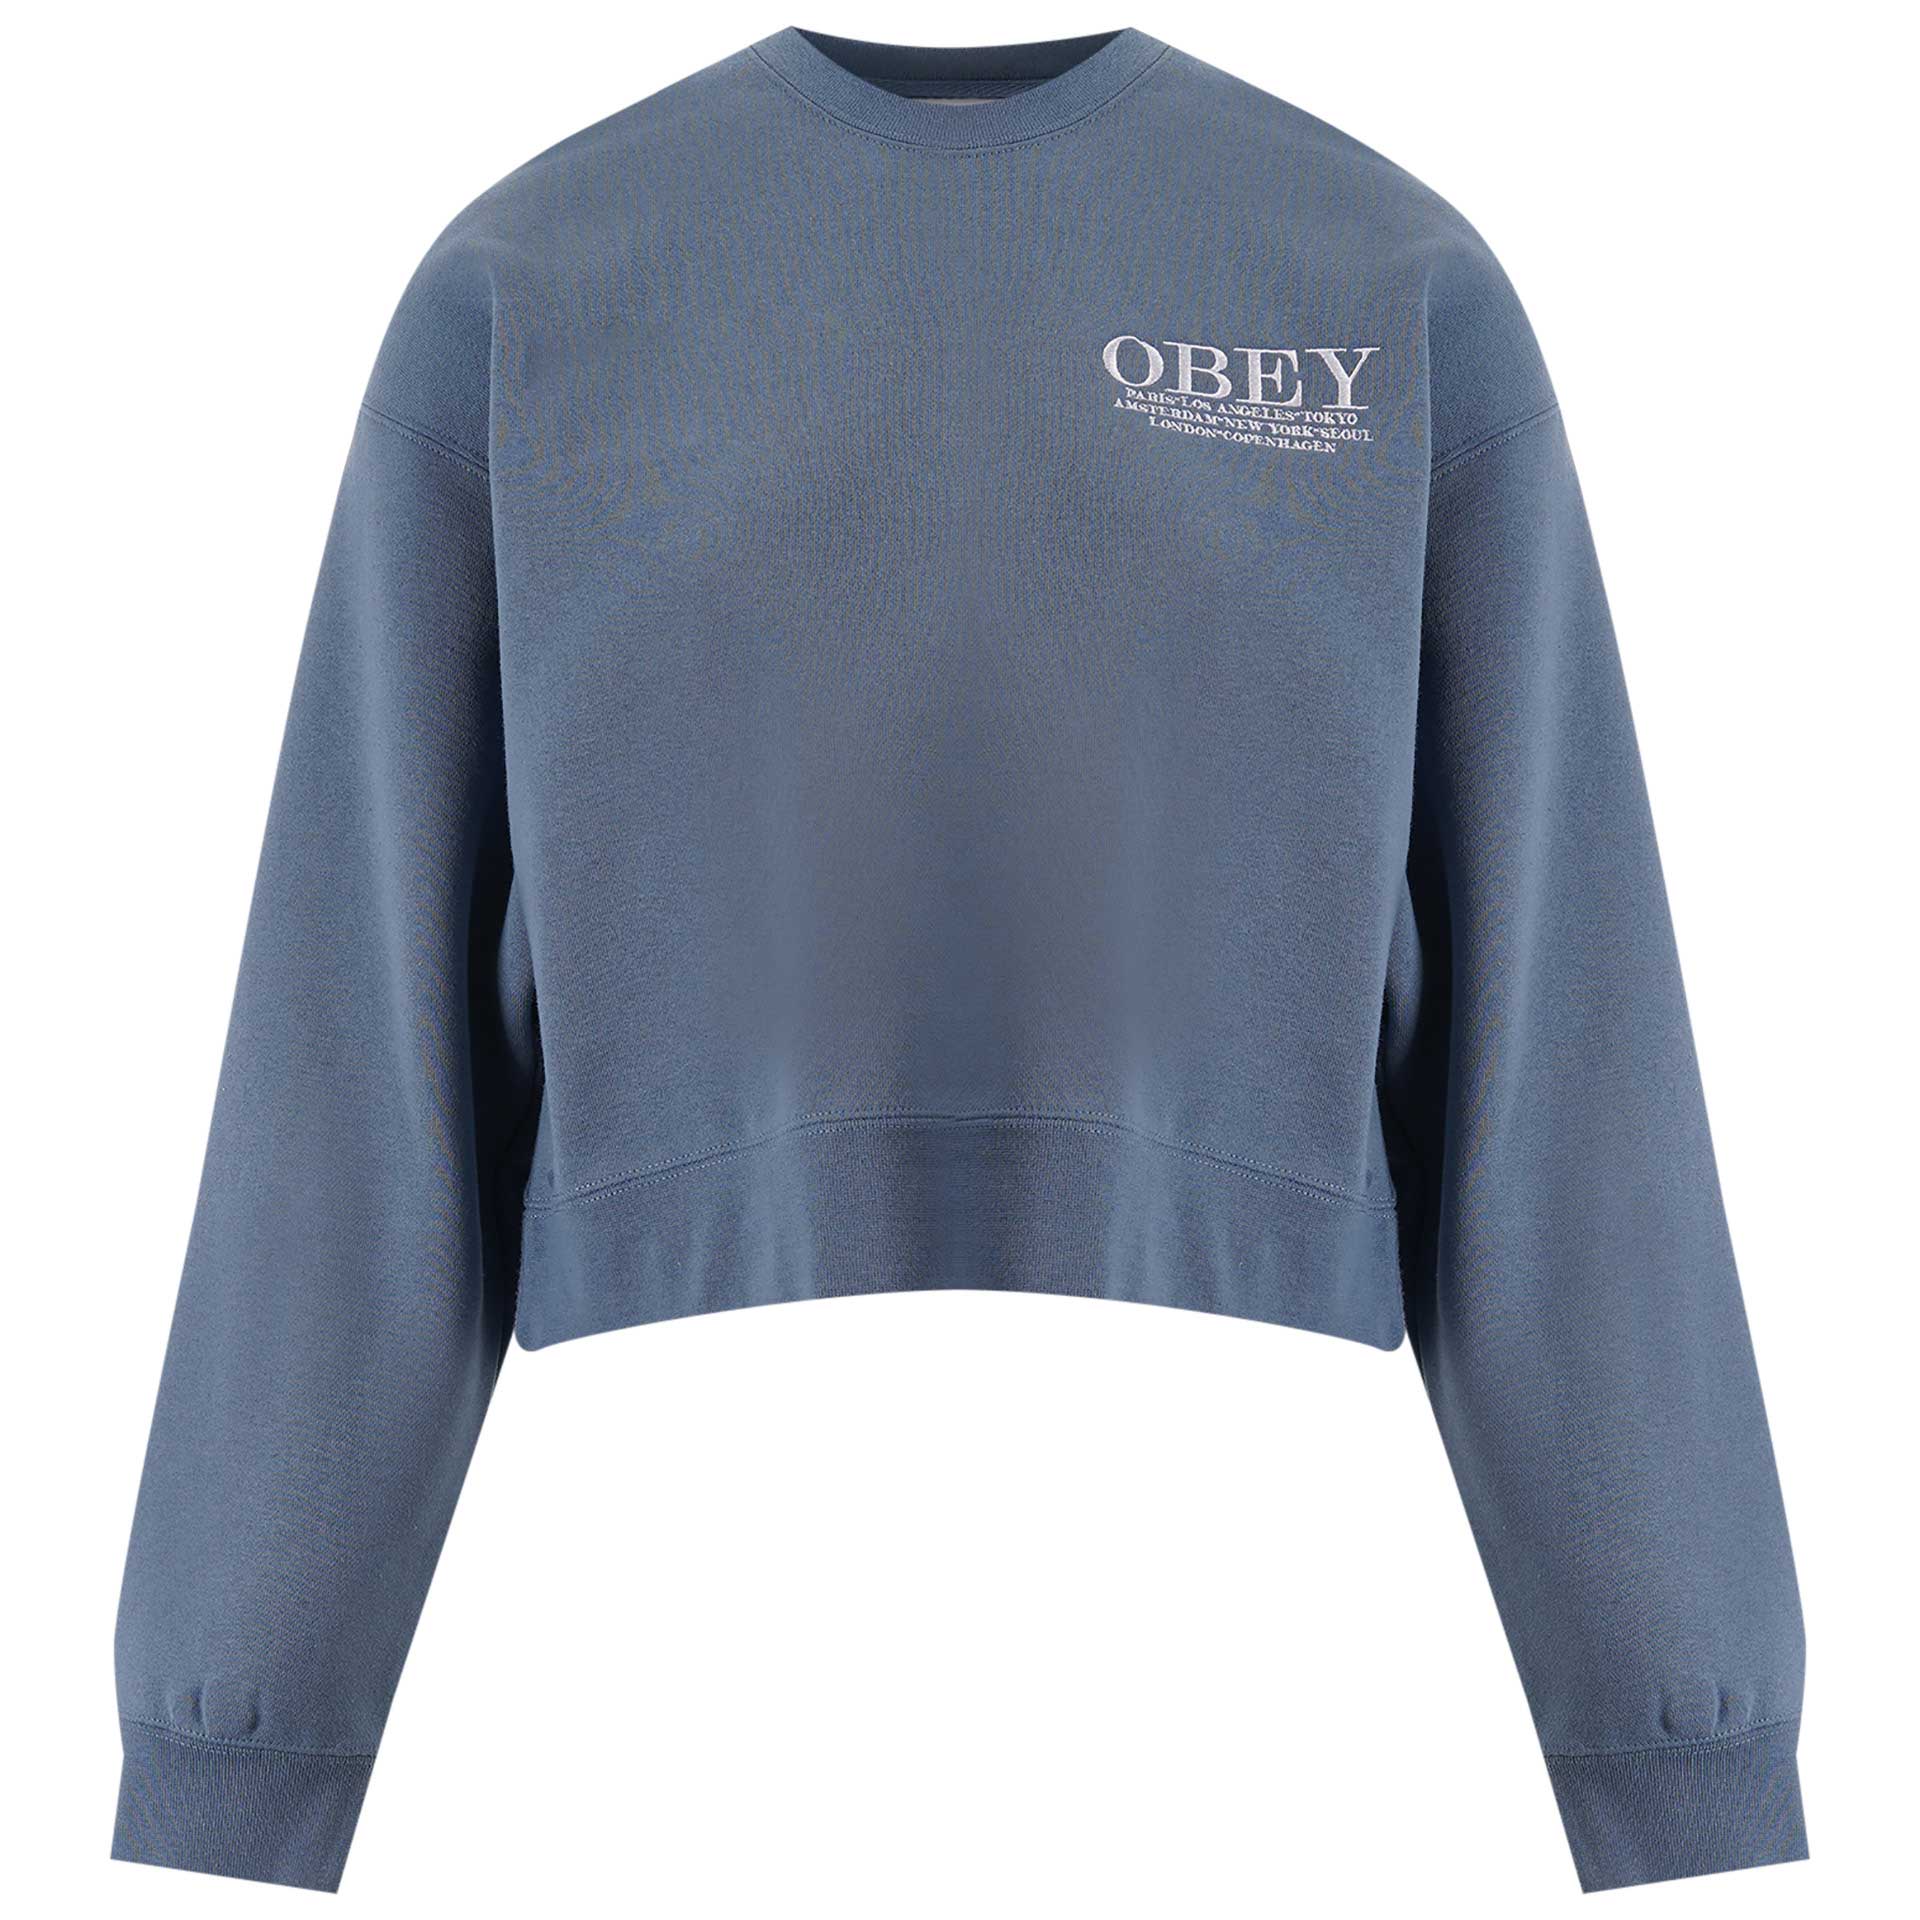 Obey Clothing Sweater 1